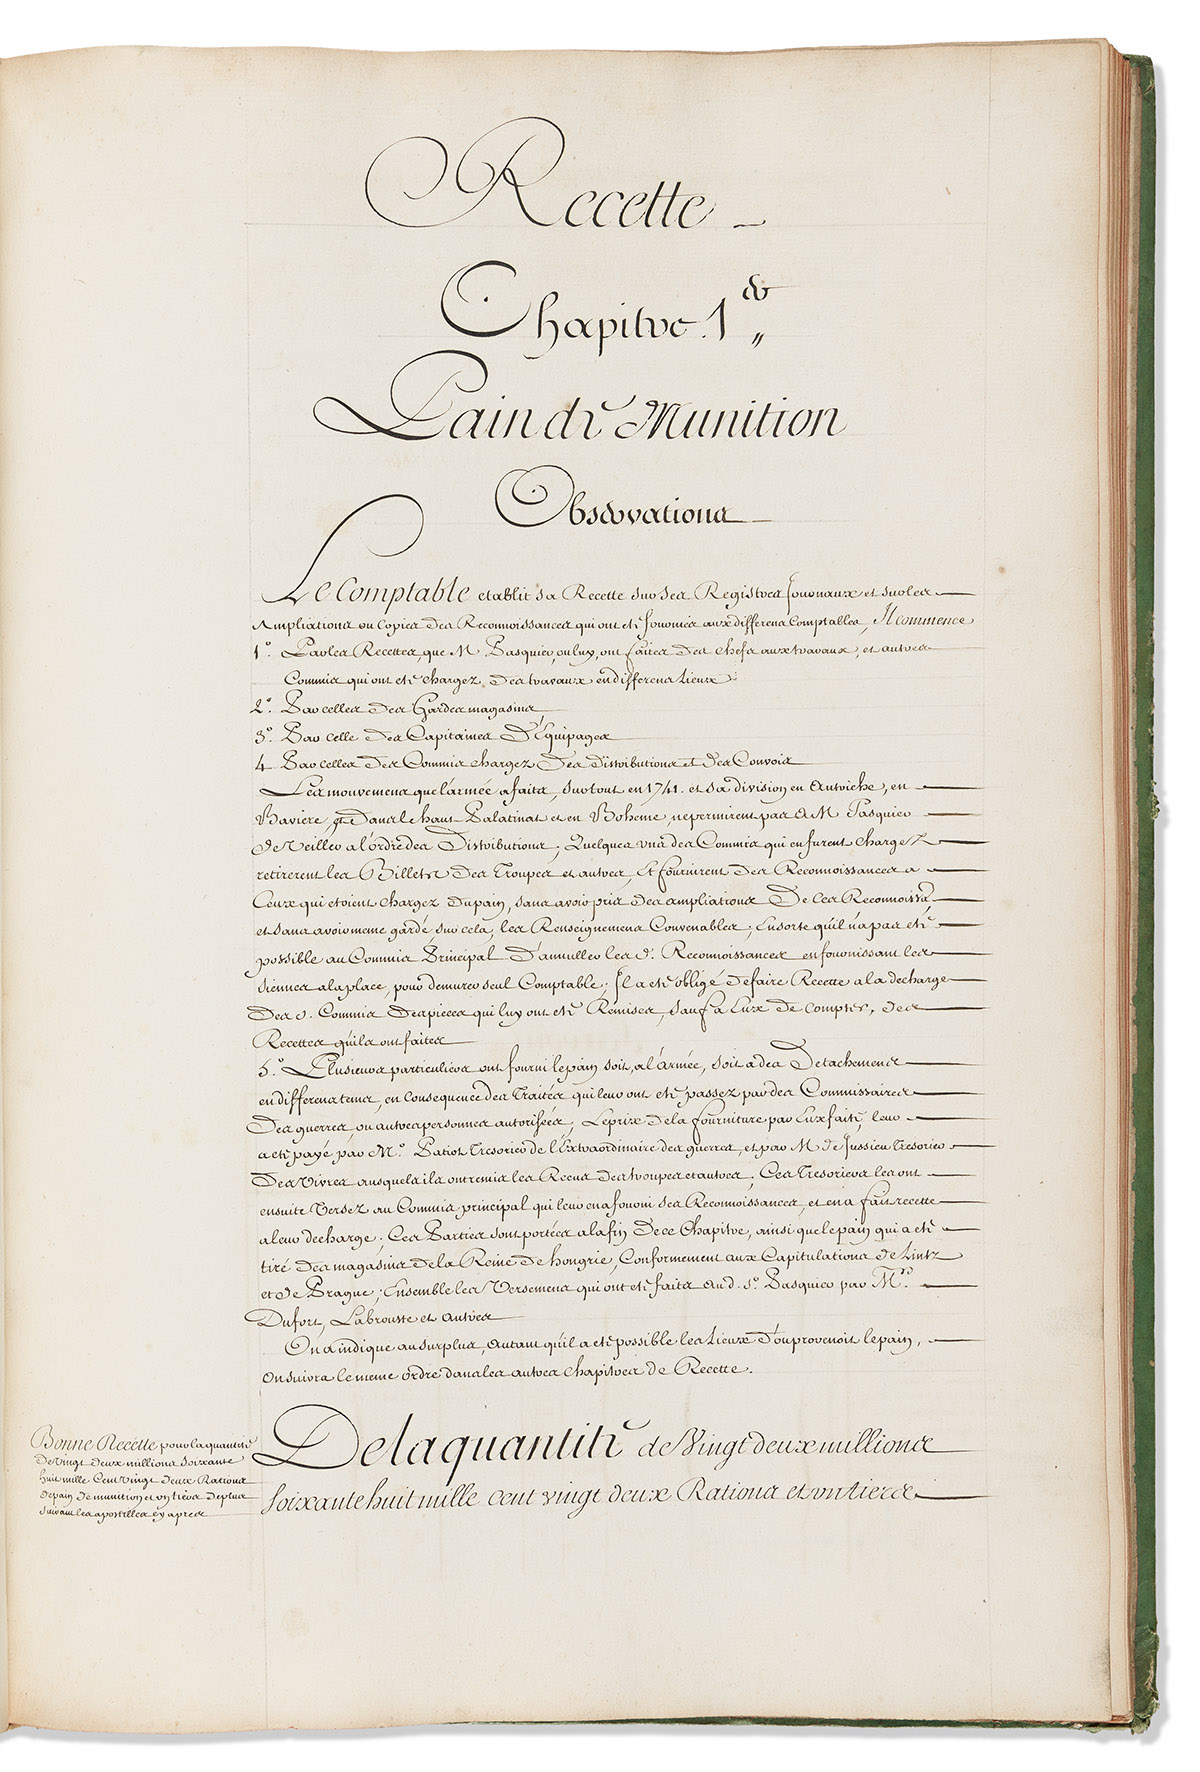 Army of Bohemia, Manuscript on Paper. Account of Supplies, Equipment and Food Used by the Army: 1741-1743.